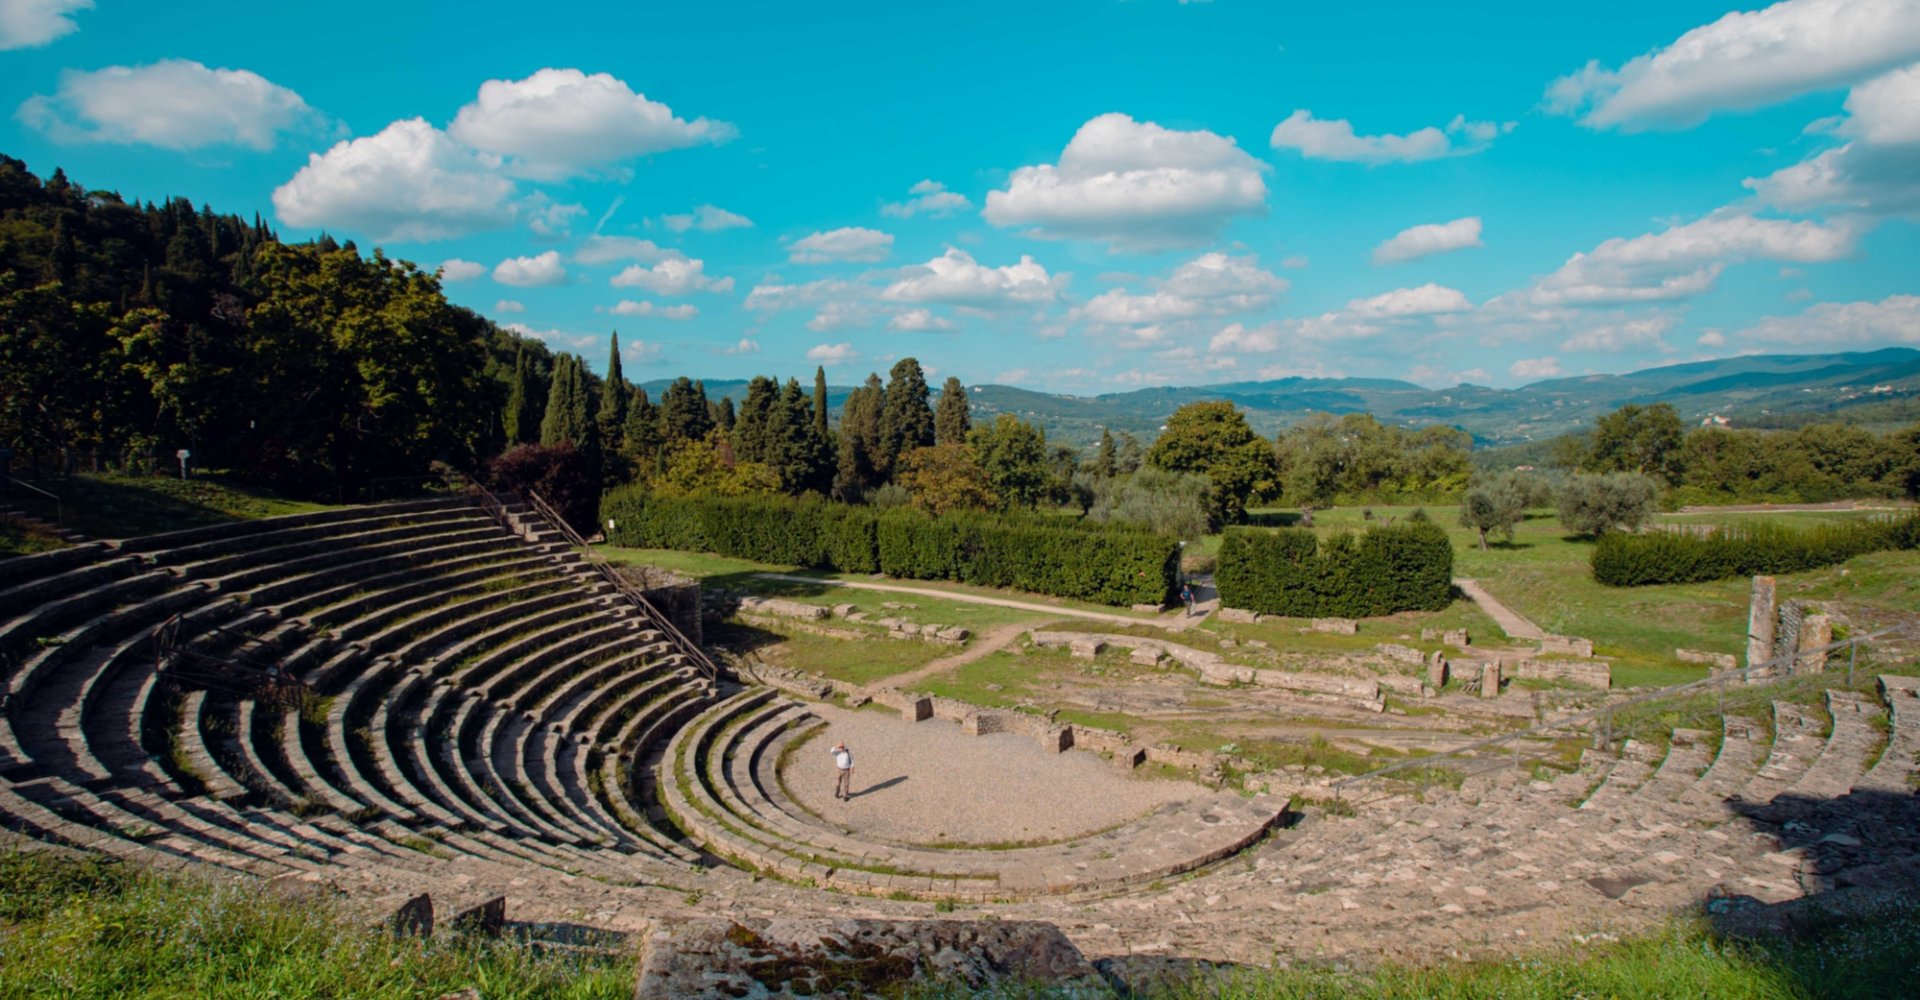 The Amphitheater of Fiesole